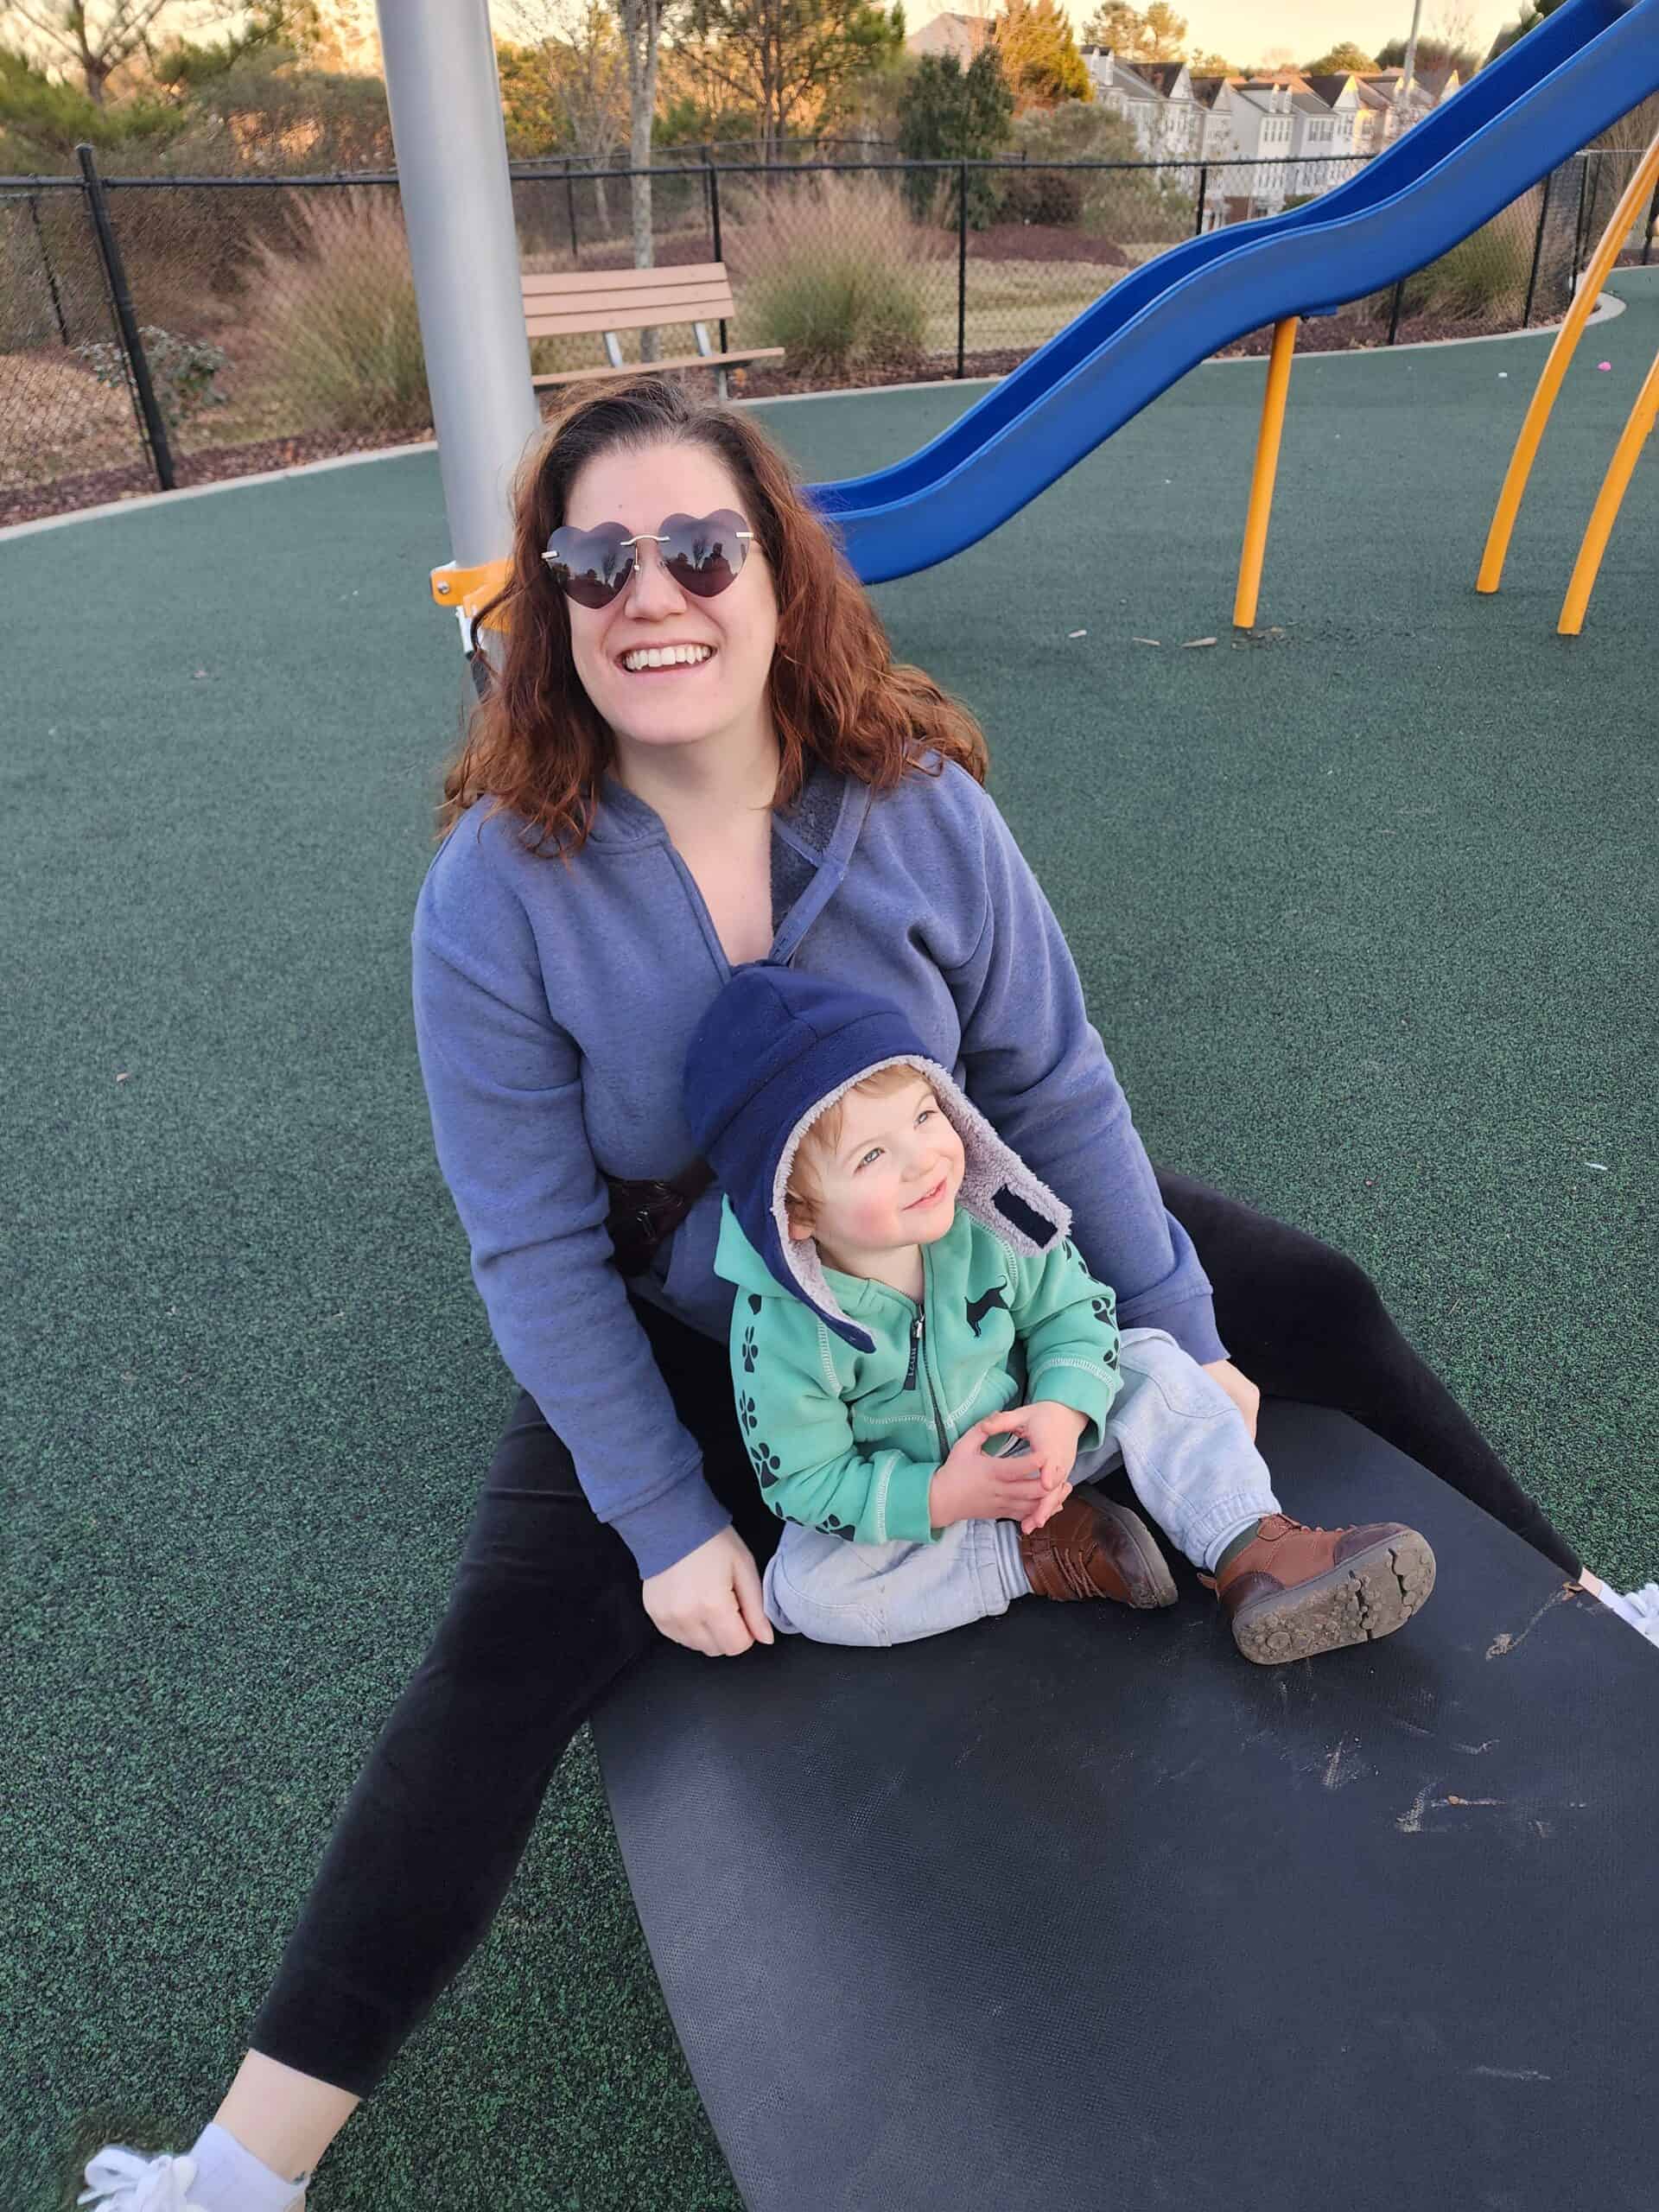 A joyful moment as a woman with heart-shaped sunglasses smiles broadly, seated on a playground mat with a young child on her lap. The child, wearing a green jacket and a beanie, looks up with a delighted expression. In the background, there's a blue slide and a bench, indicative of a well-maintained park setting during what appears to be dusk.